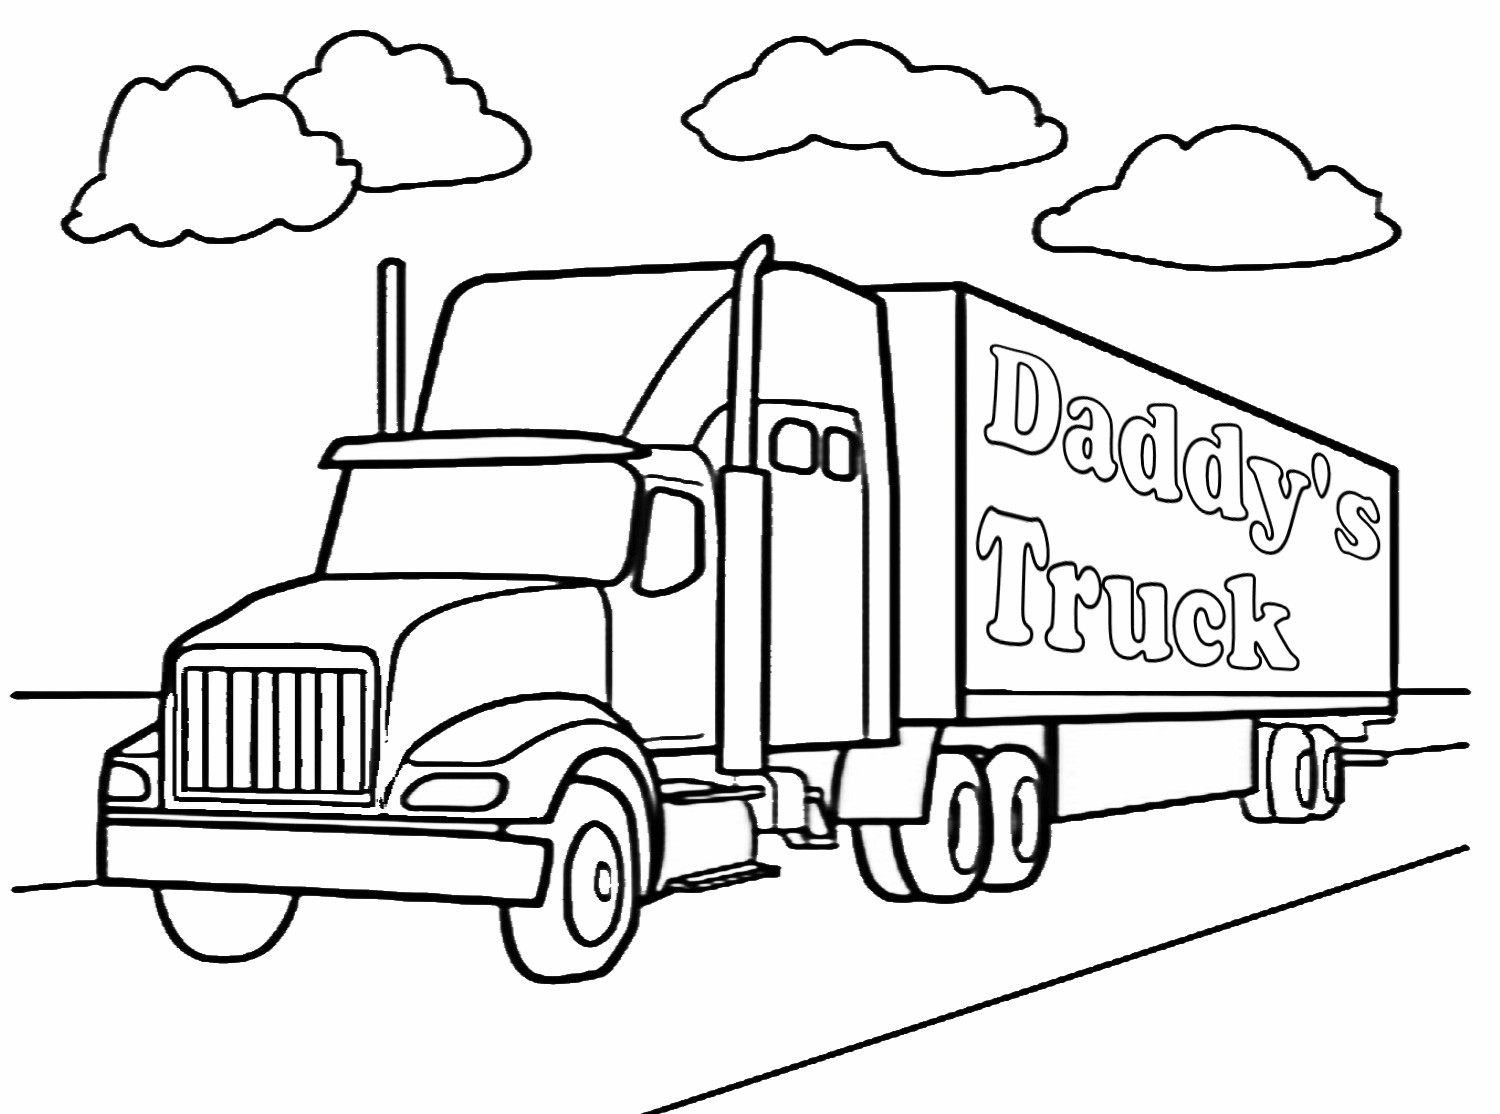 Simple Tractor Trailer Coloring Page with simple drawing